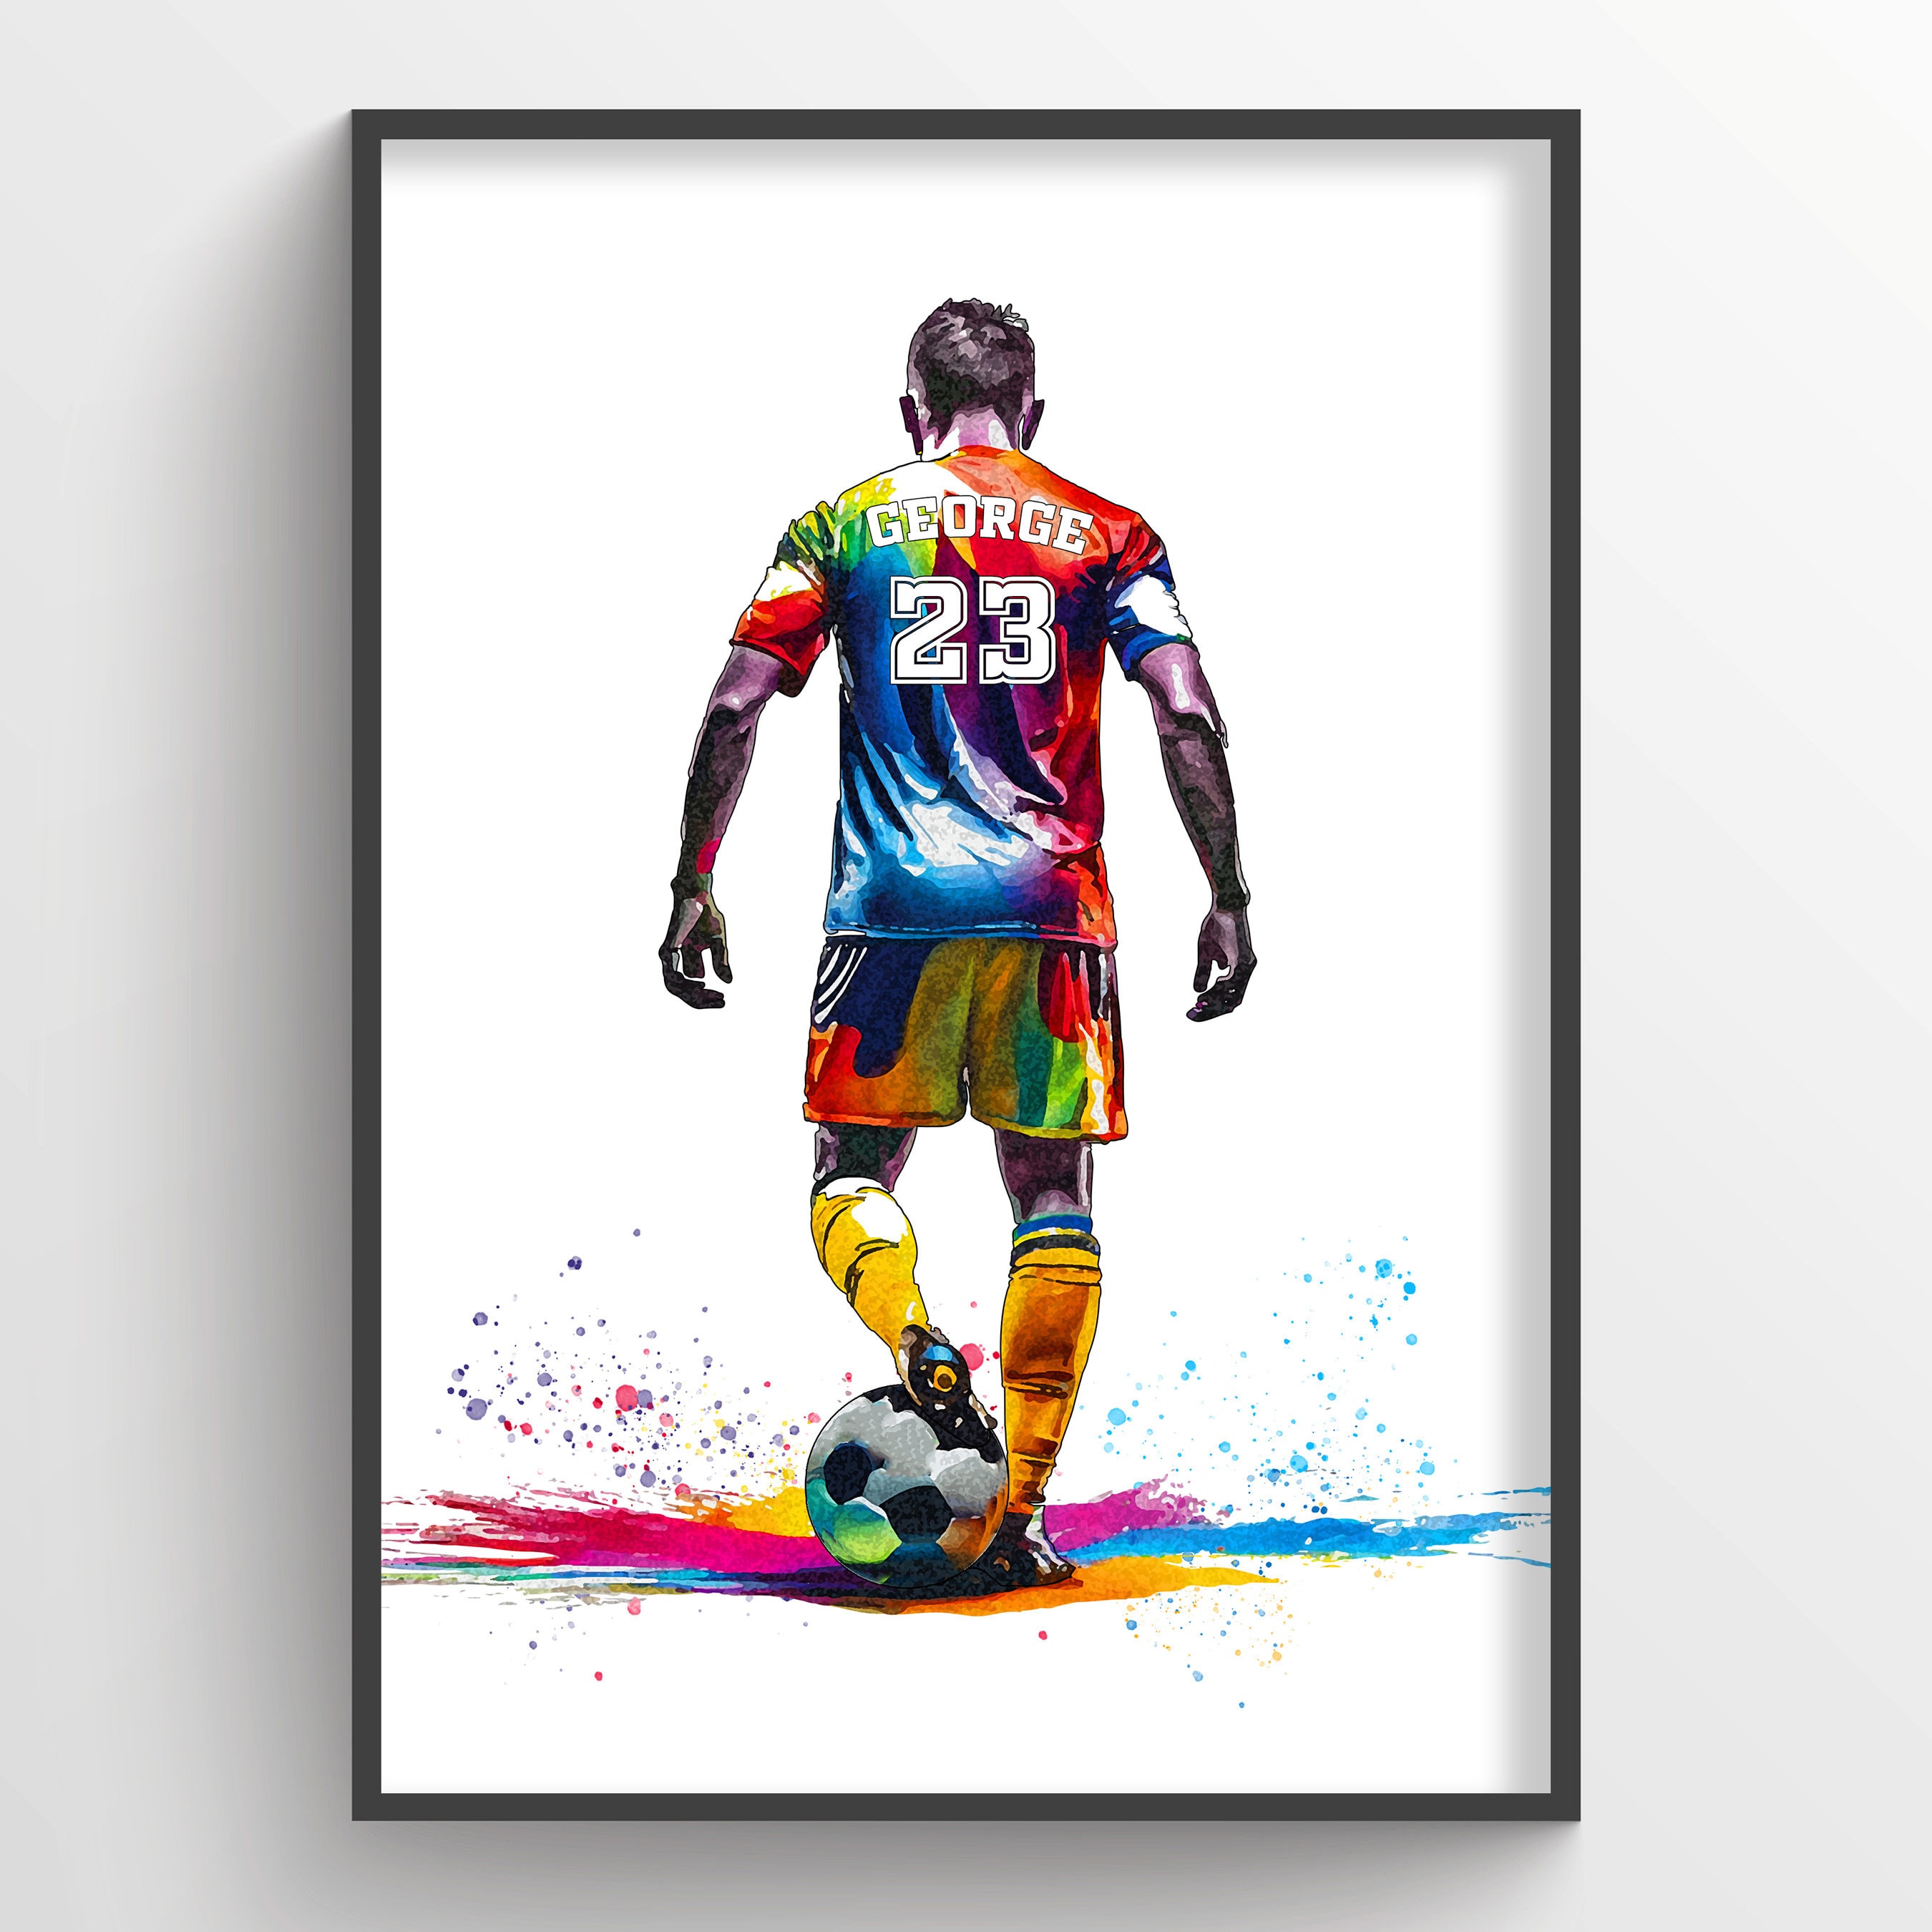 Kylian Mbappé footballer Decal Removable Vinyl Mural Poster For Kids Room  Living Room Home Decor Wall Decal Home Decor - AliExpress